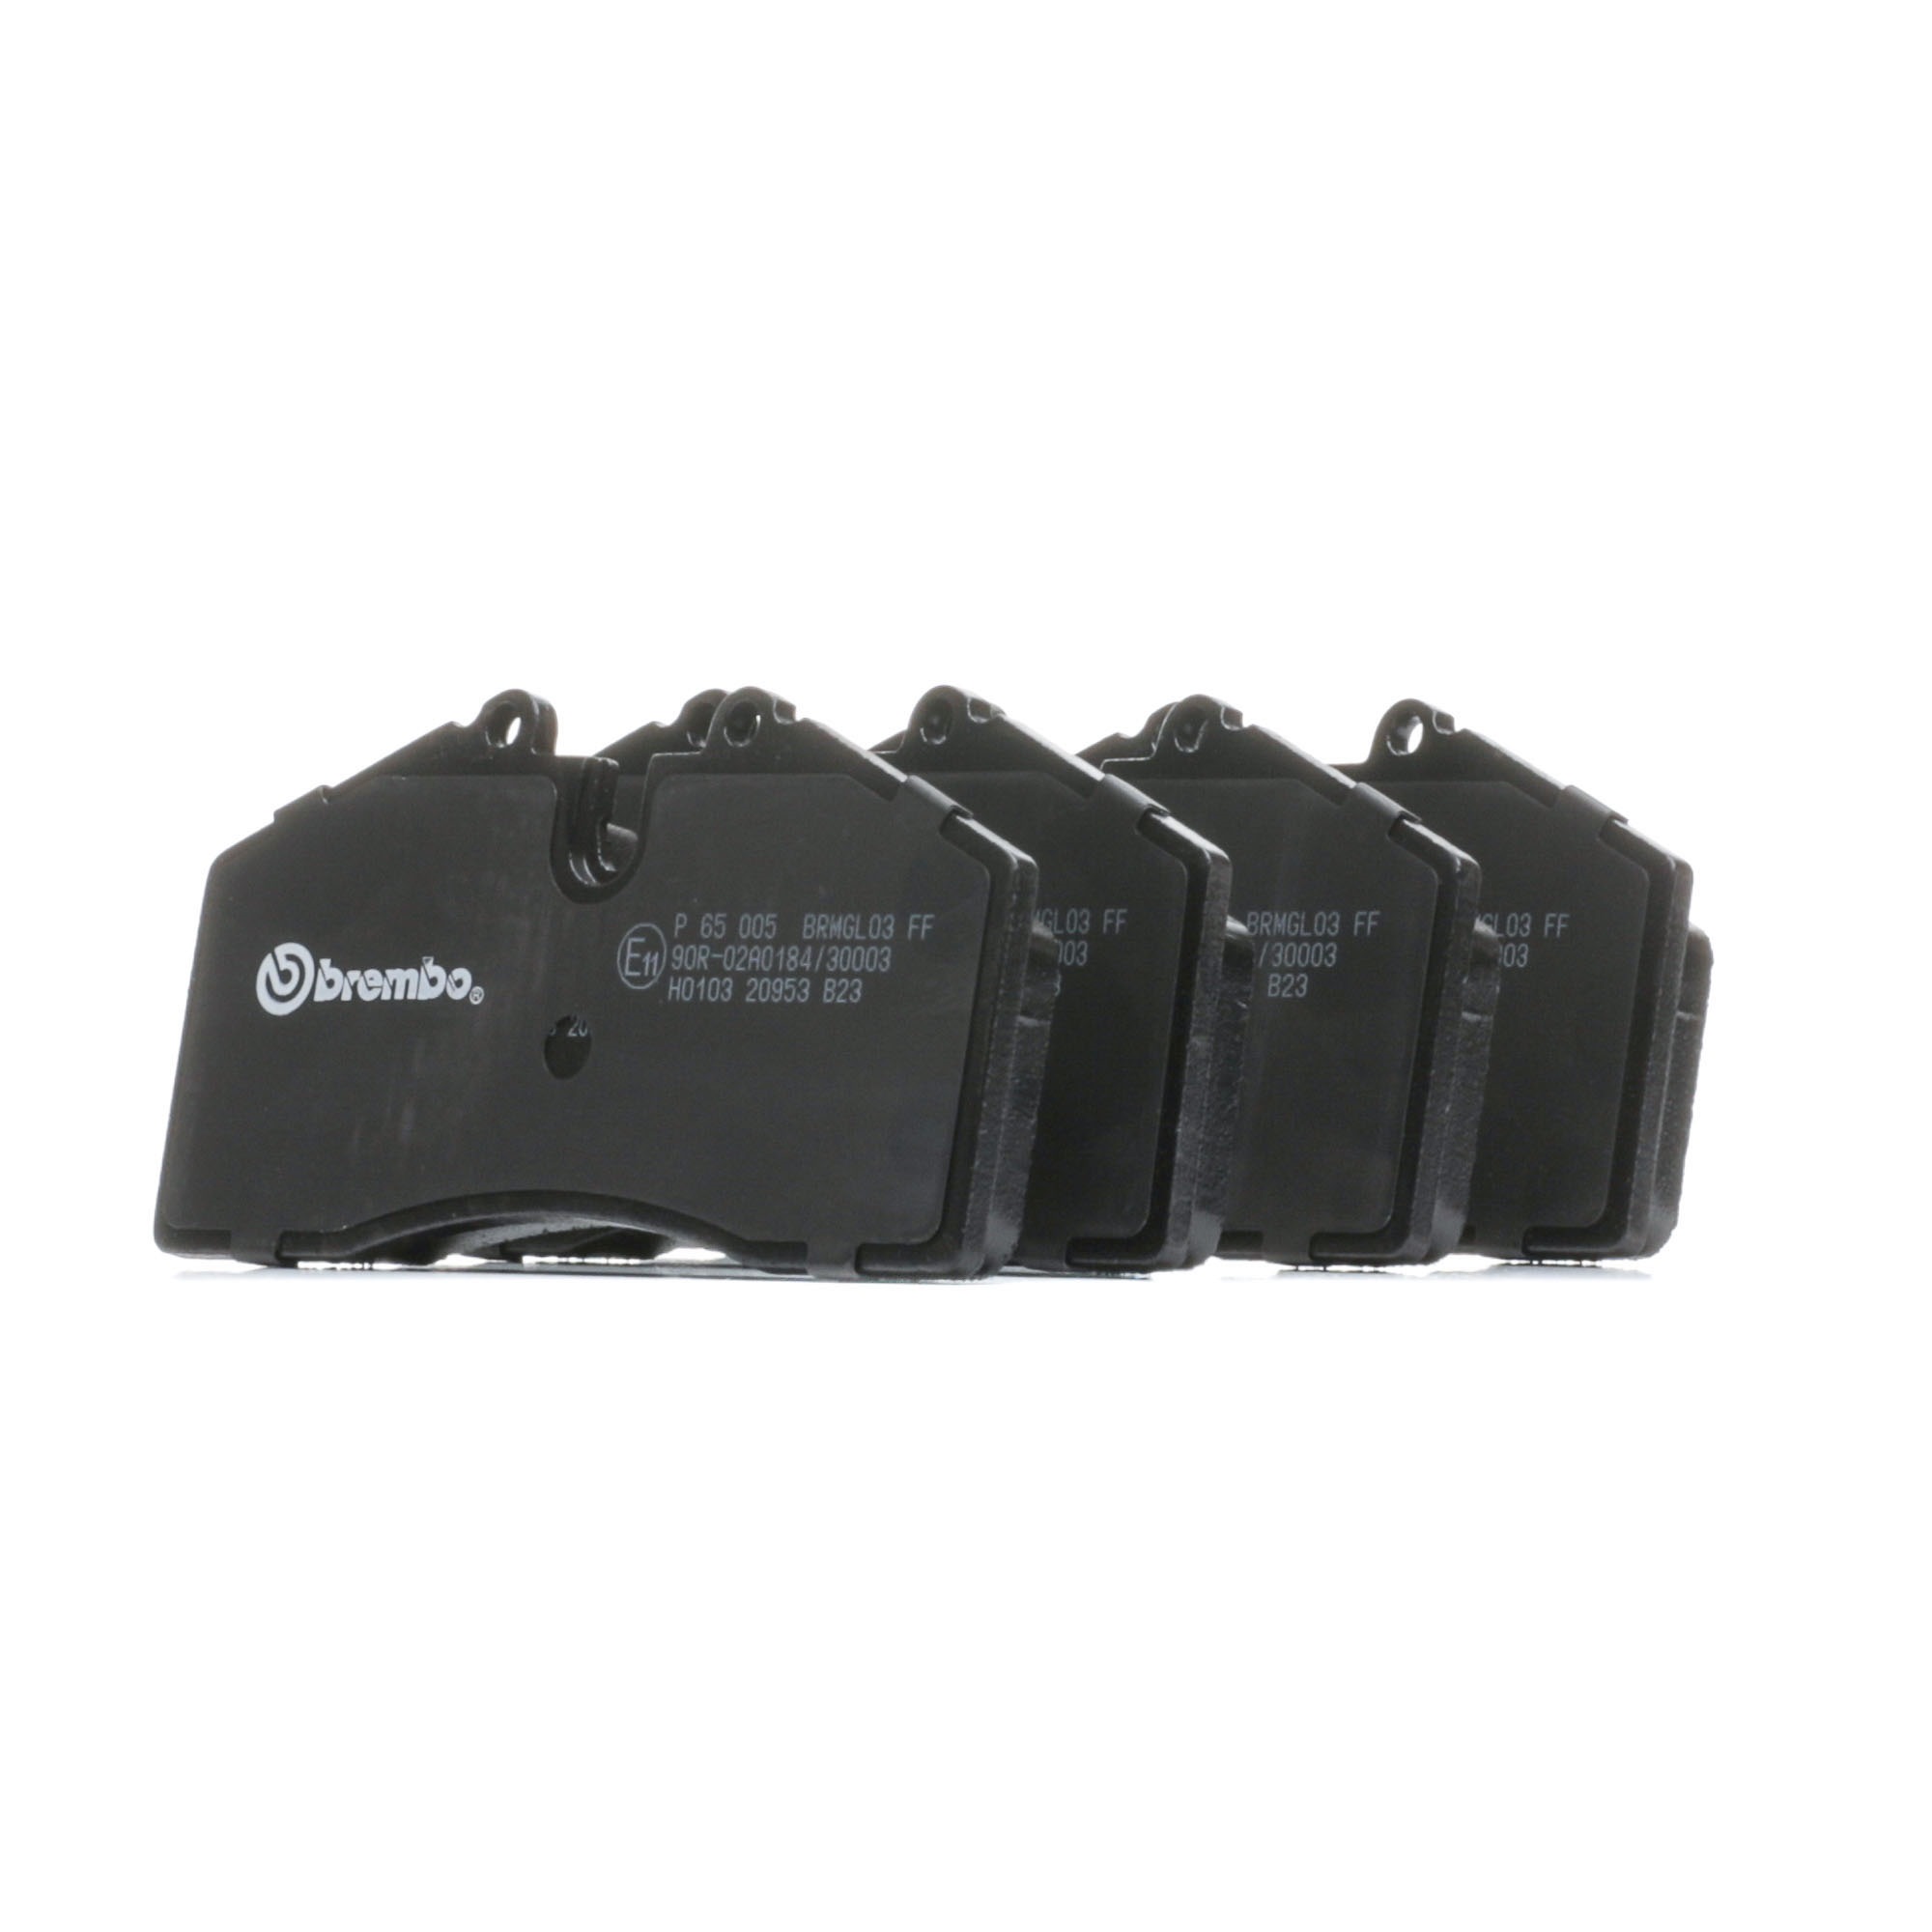 BREMBO P 65 005 Brake pad set prepared for wear indicator, without accessories